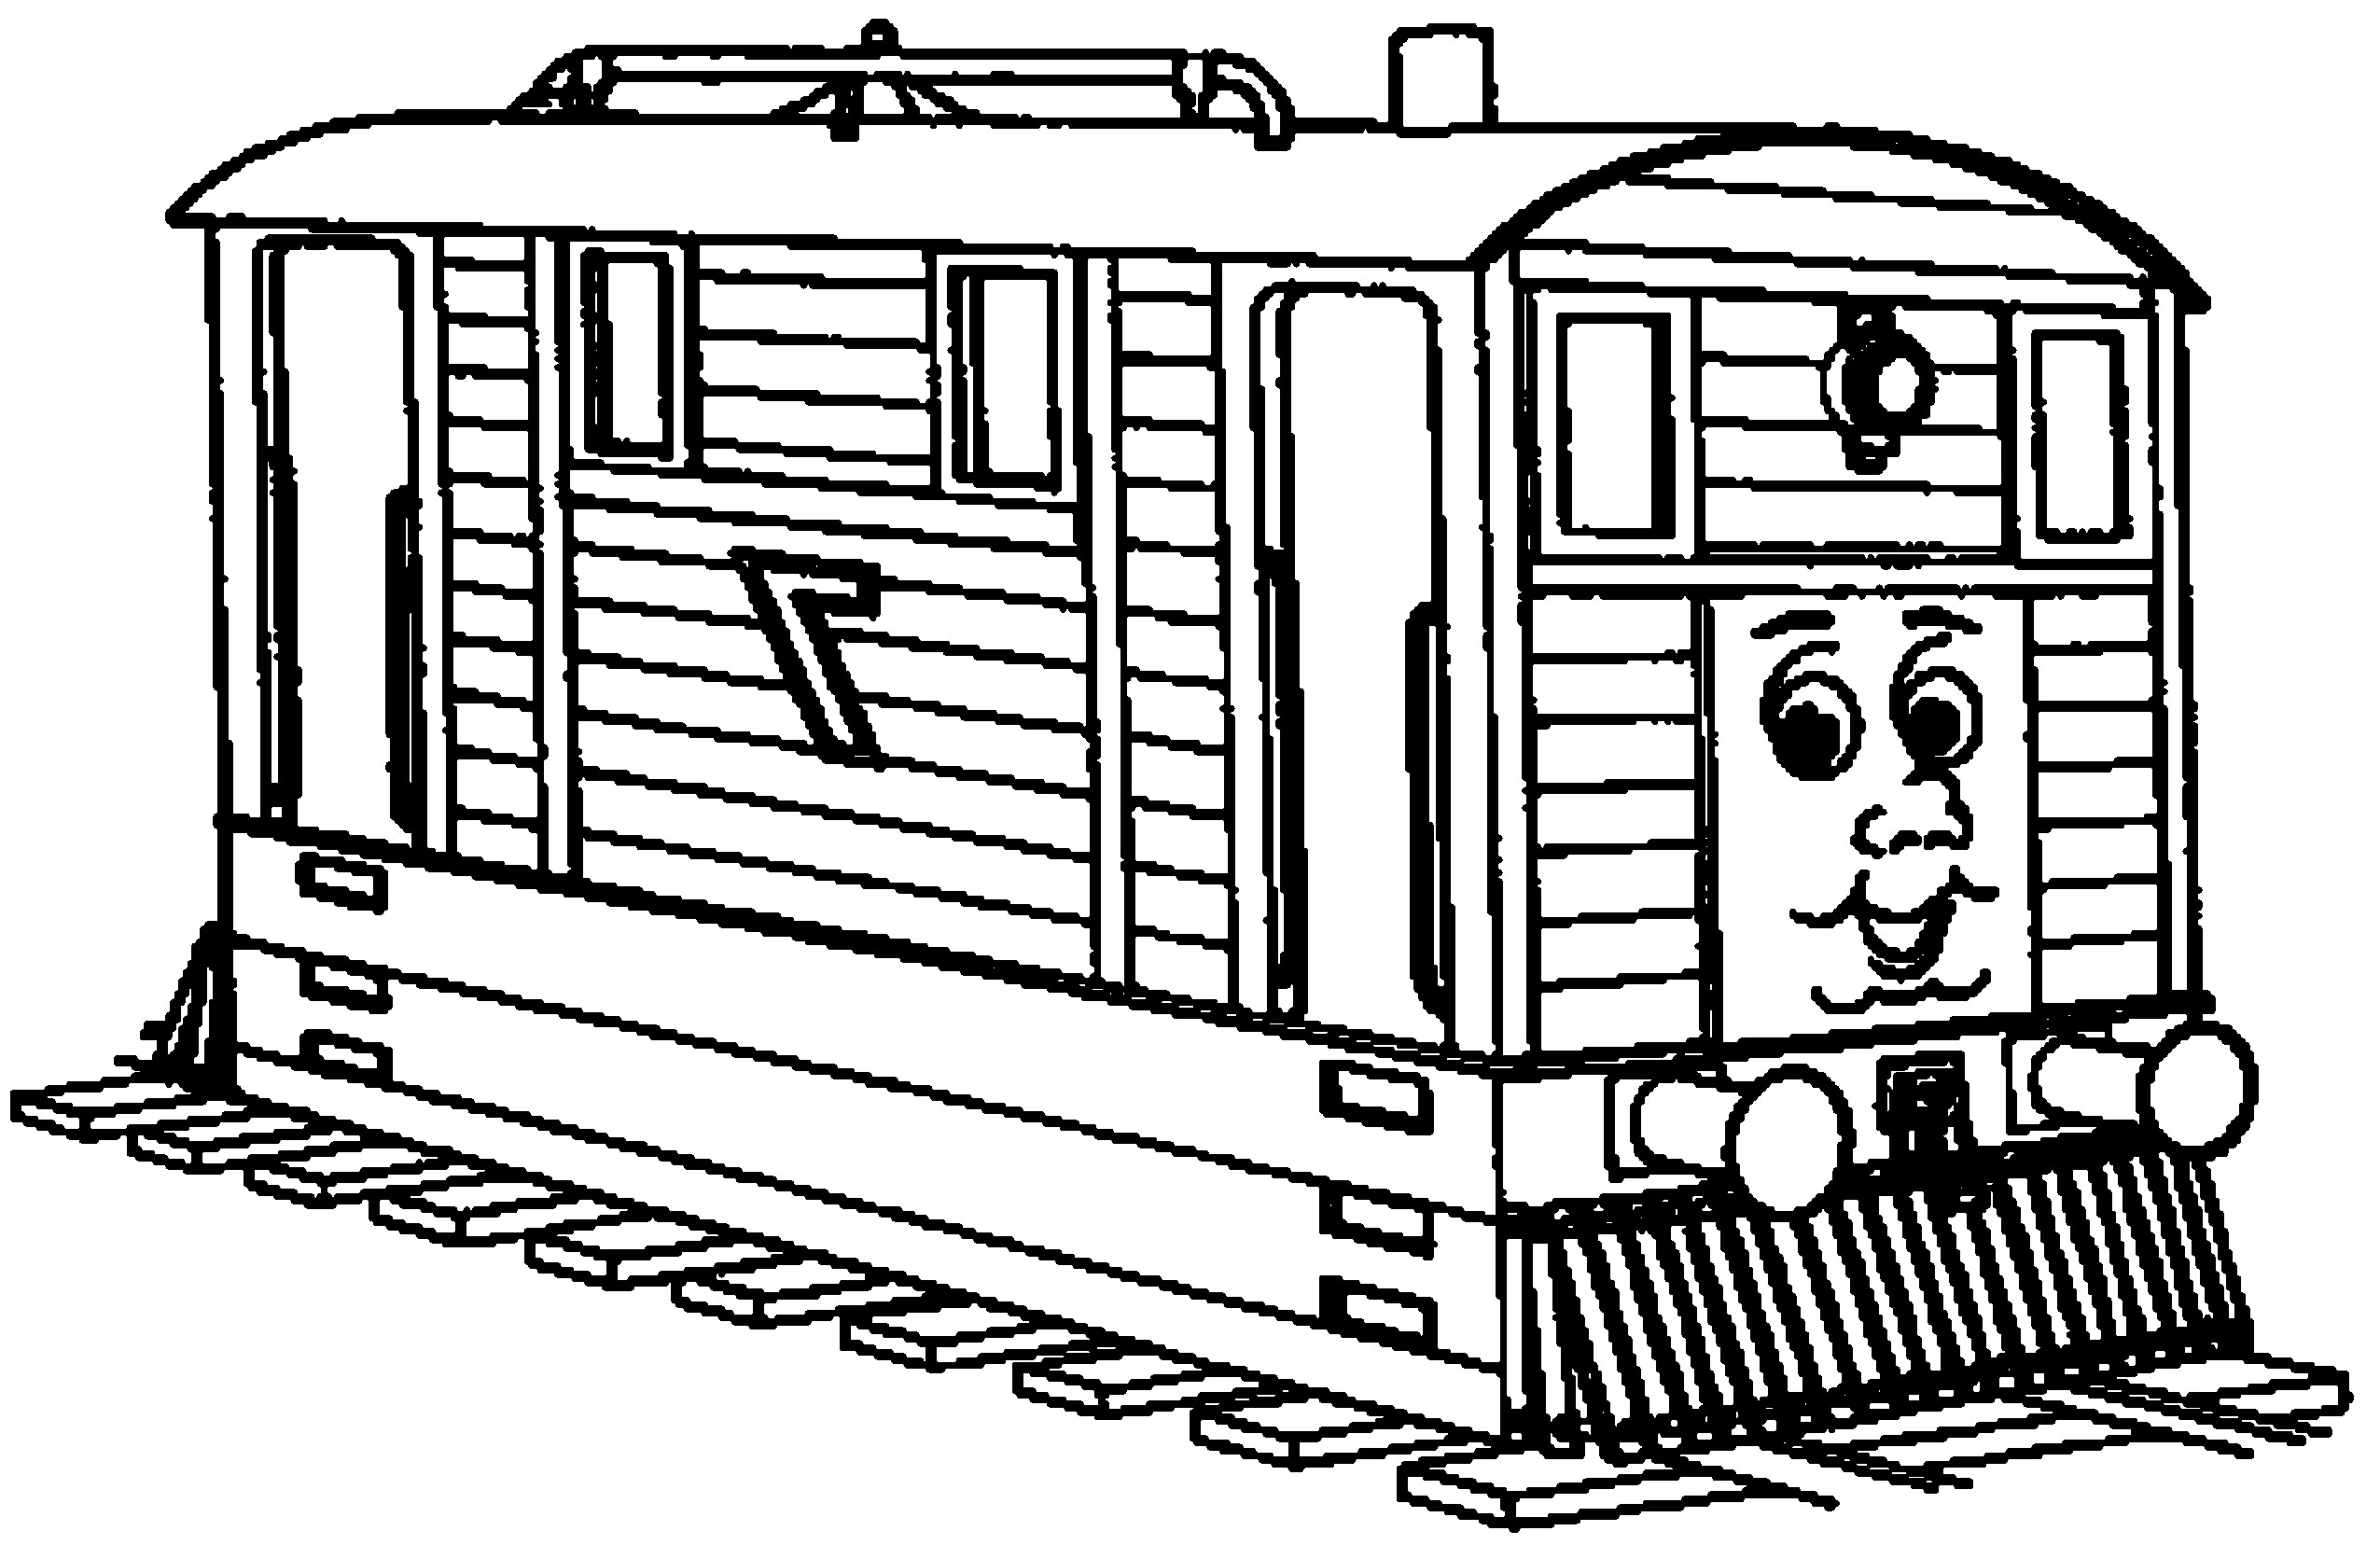 Csx Train Coloring Pages at Free printable colorings